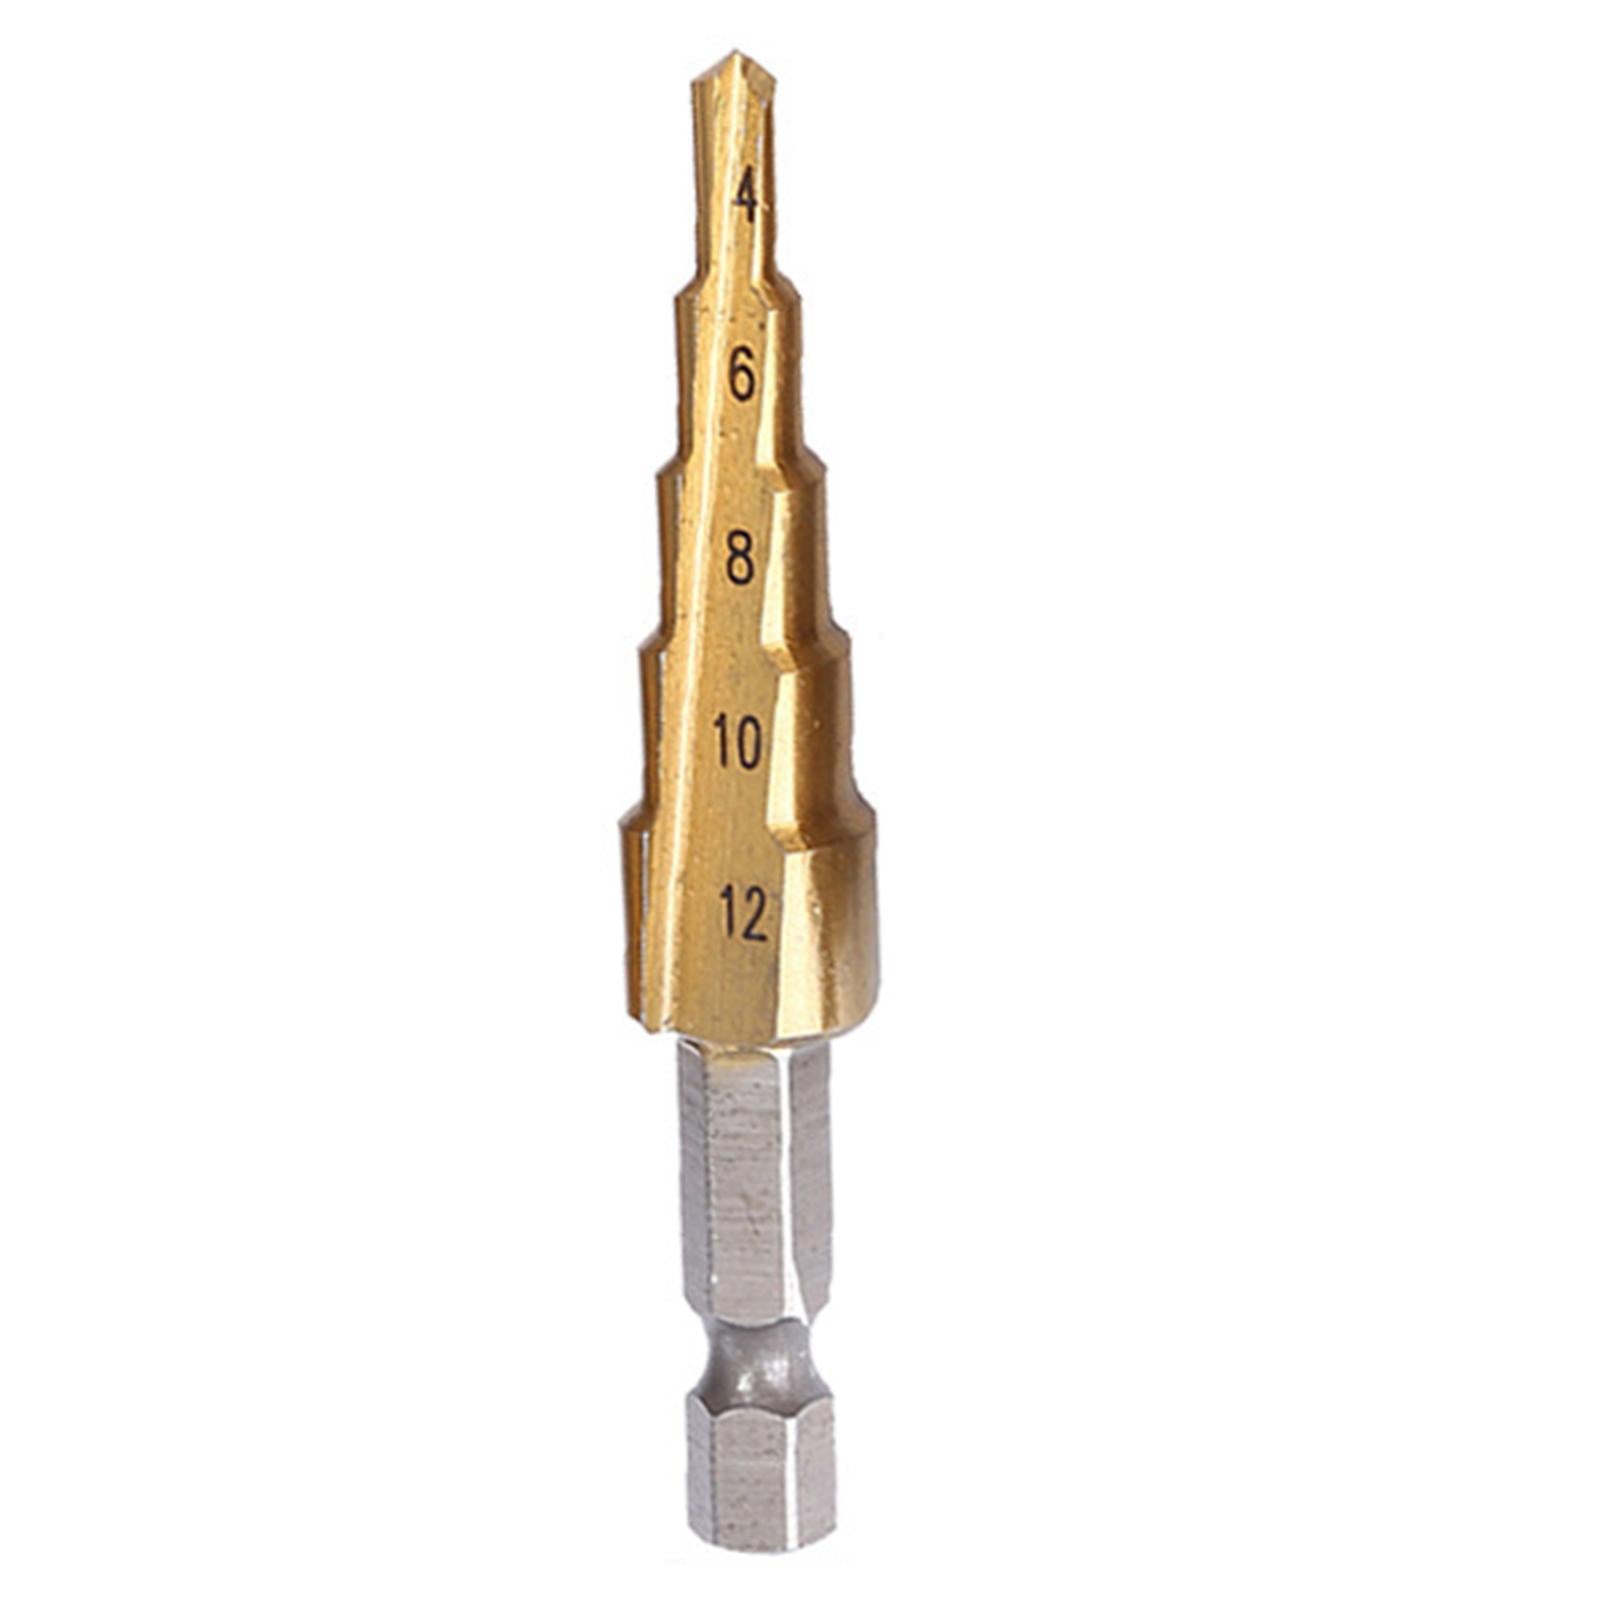 Drilling Step Drill Bit for Stainless Steel Metal 1pcs 4-12